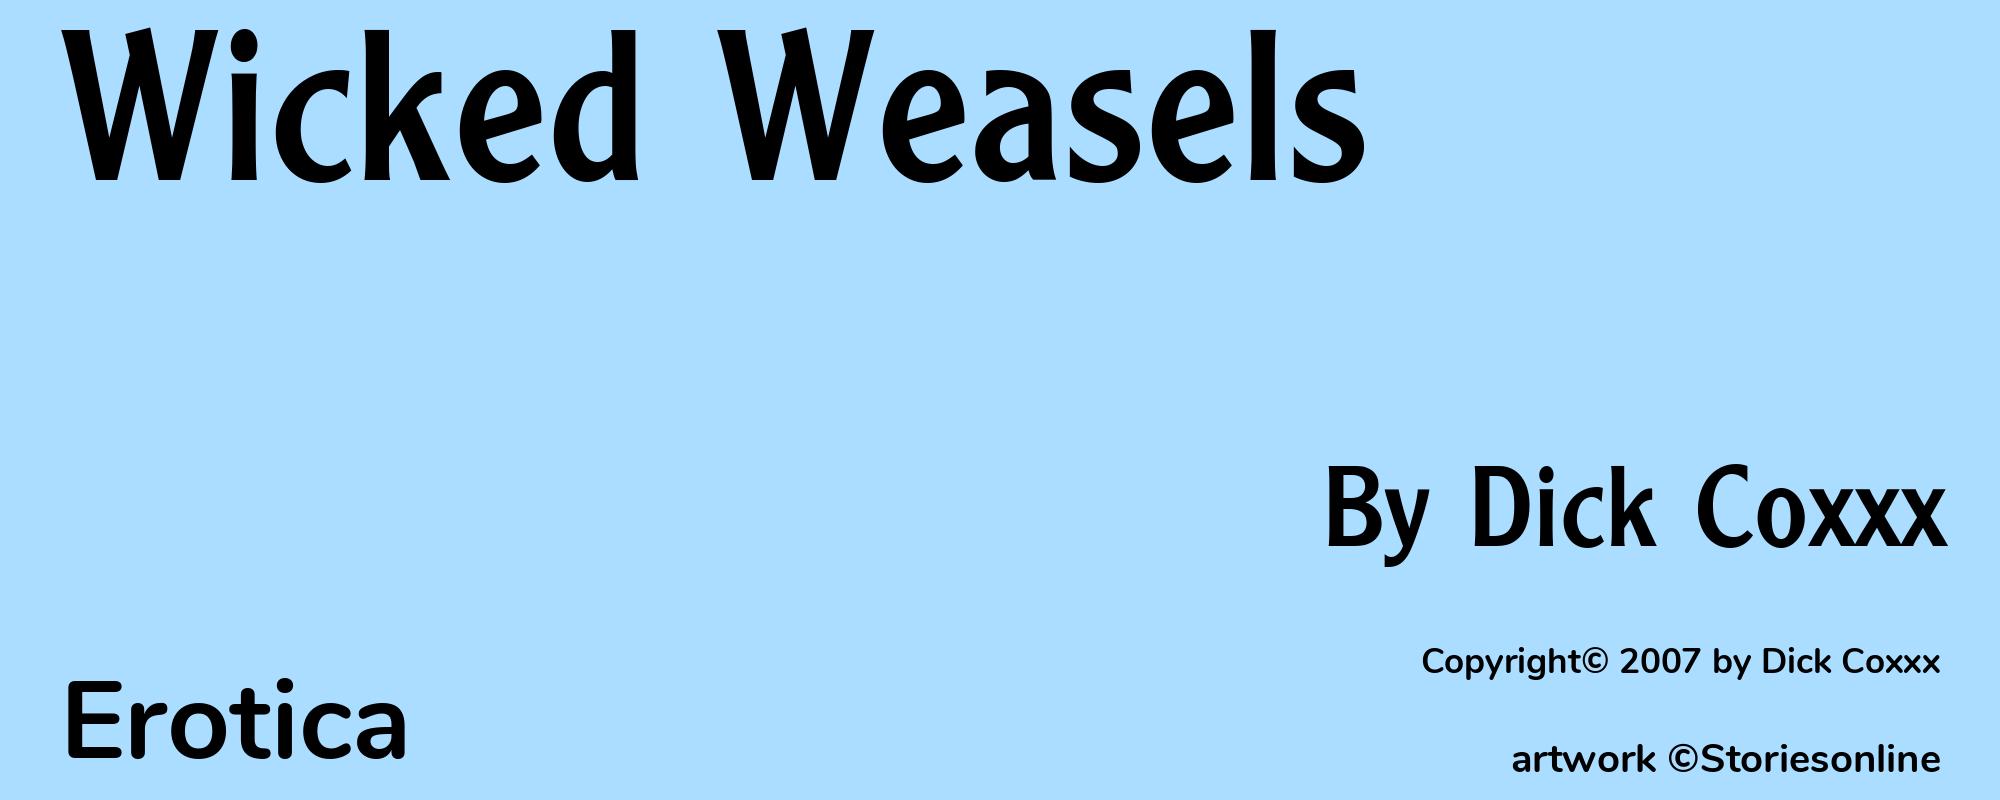 Wicked Weasels - Cover